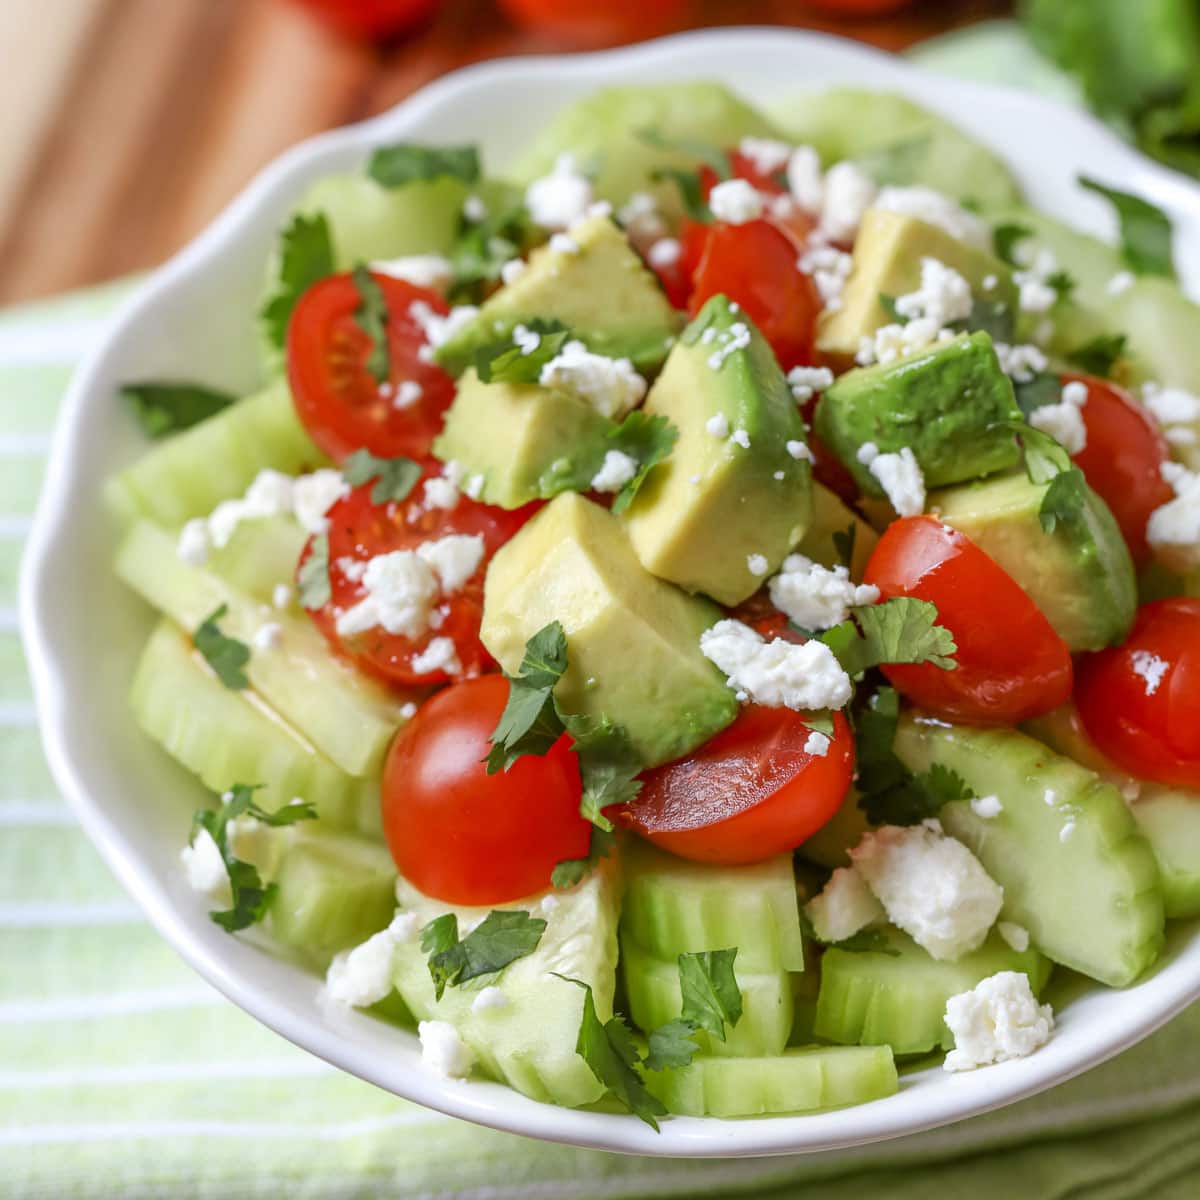 Vegetable side dishes - a bowl filled with cucumber tomato avocado salad.